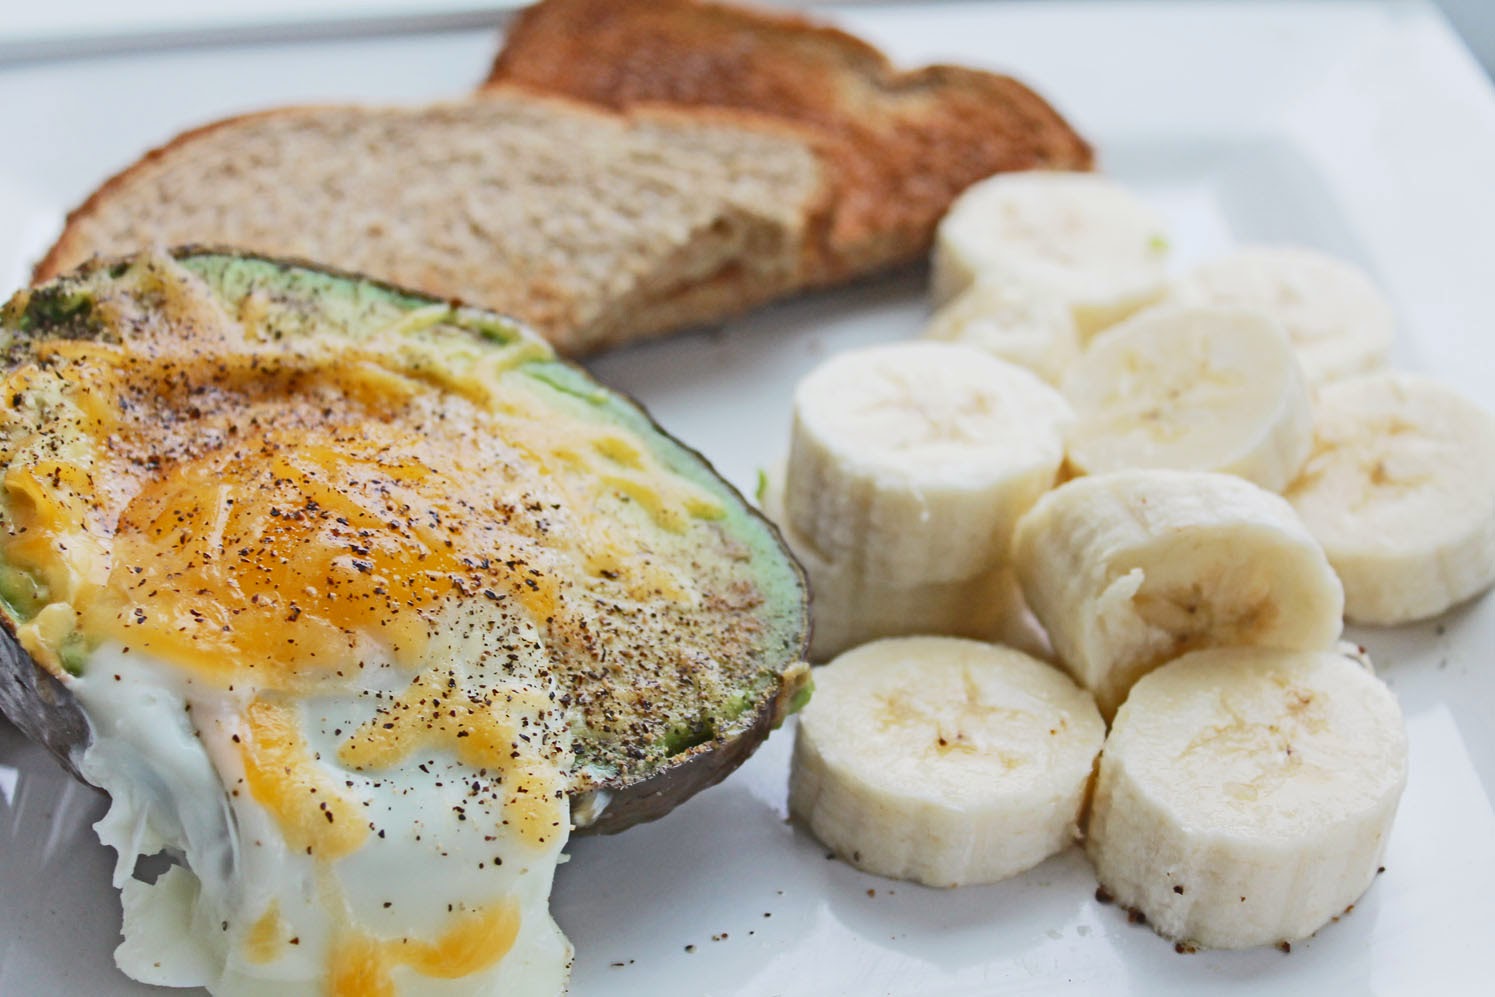 Easy Healthy Breakfast | Recipes and Ideas for Healthy Breakfast Meals